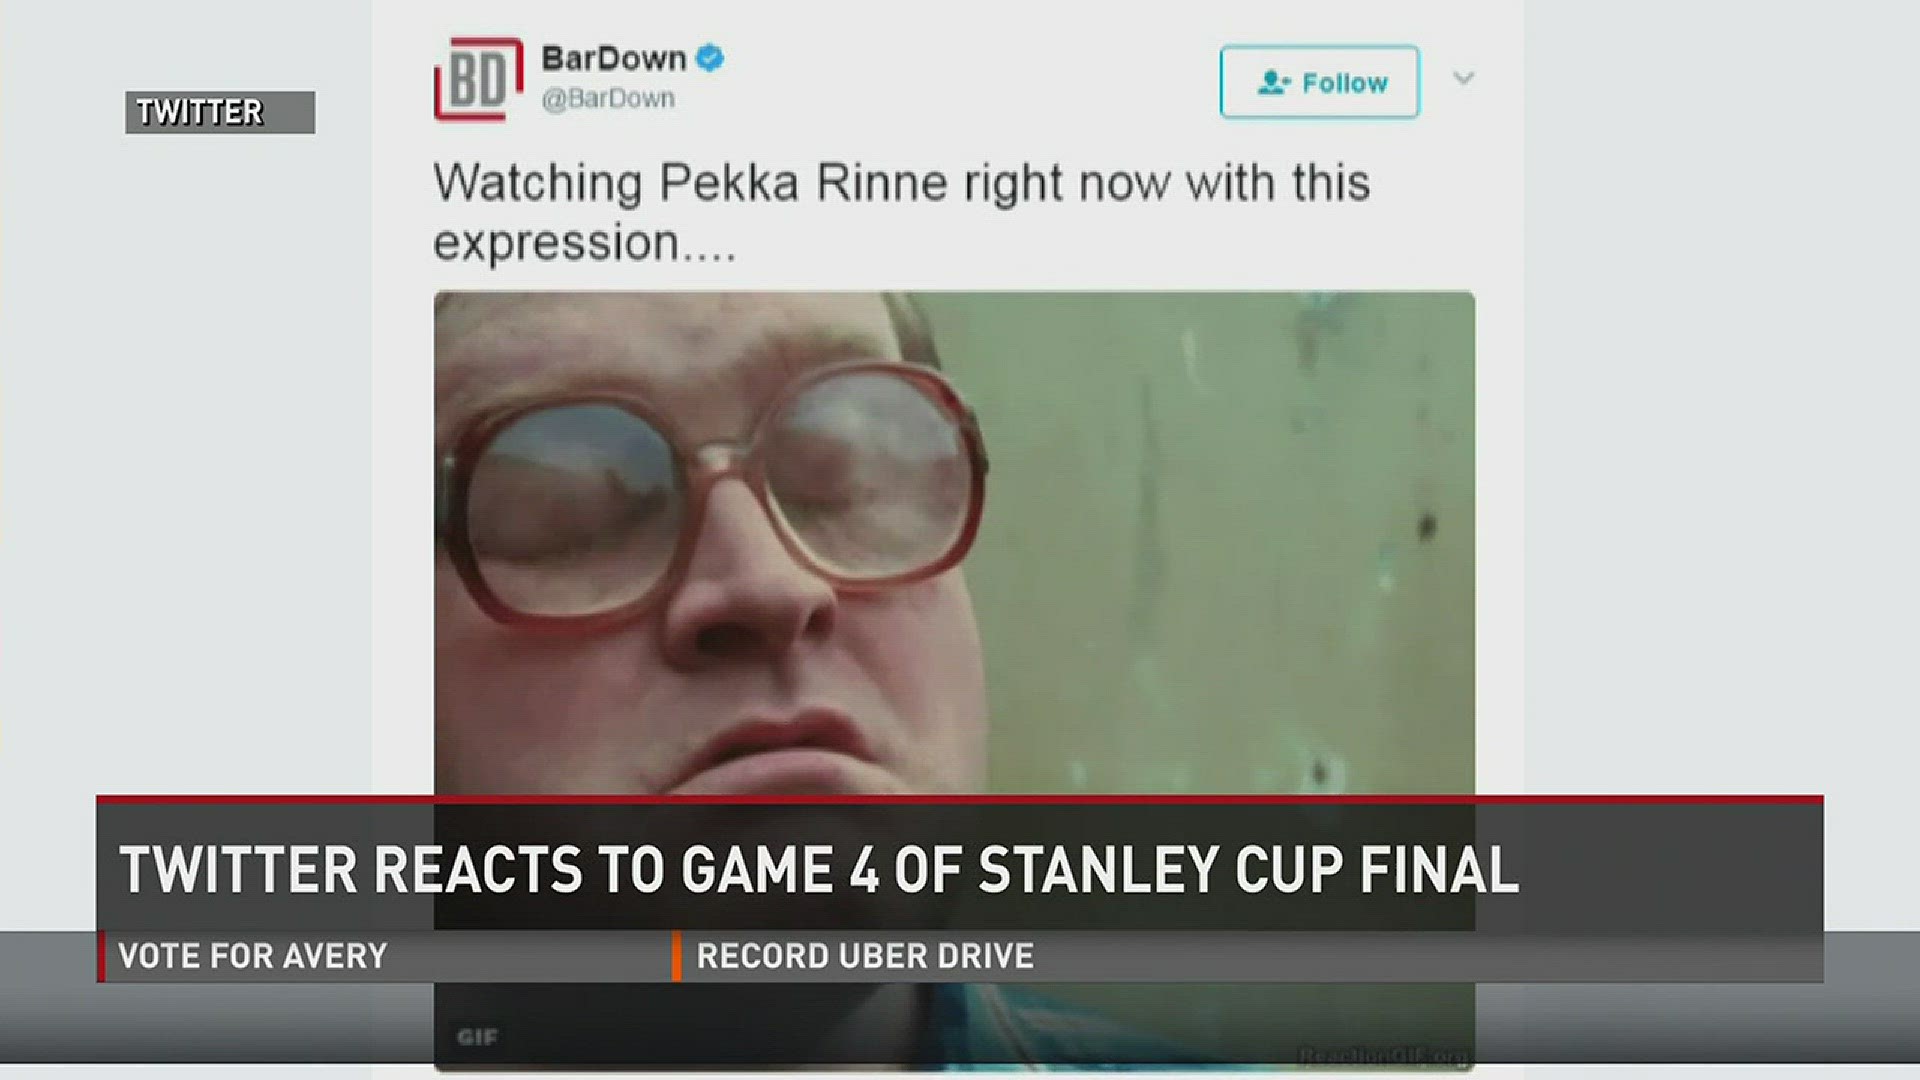 Twitter reactions to Pekka Rinne's incredible performance in Game 4 of the Stanley Cup Final.